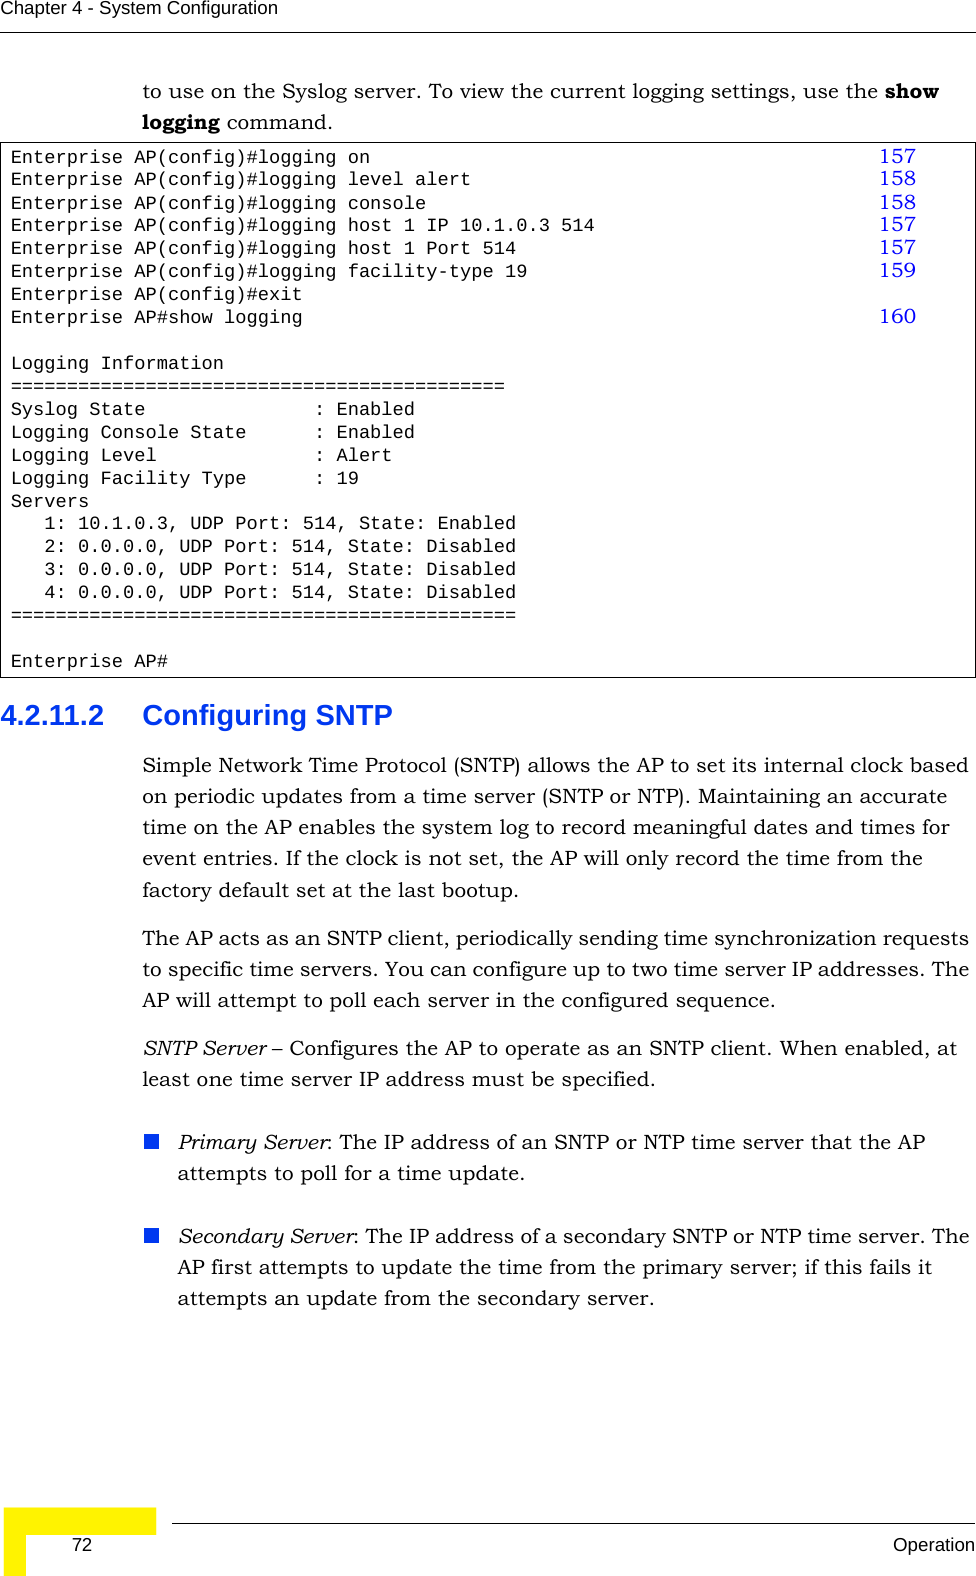  72 OperationChapter 4 - System Configurationto use on the Syslog server. To view the current logging settings, use the show logging command.4.2.11.2 Configuring SNTPSimple Network Time Protocol (SNTP) allows the AP to set its internal clock based on periodic updates from a time server (SNTP or NTP). Maintaining an accurate time on the AP enables the system log to record meaningful dates and times for event entries. If the clock is not set, the AP will only record the time from the factory default set at the last bootup.The AP acts as an SNTP client, periodically sending time synchronization requests to specific time servers. You can configure up to two time server IP addresses. The AP will attempt to poll each server in the configured sequence.SNTP Server – Configures the AP to operate as an SNTP client. When enabled, at least one time server IP address must be specified.Primary Server: The IP address of an SNTP or NTP time server that the AP attempts to poll for a time update. Secondary Server: The IP address of a secondary SNTP or NTP time server. The AP first attempts to update the time from the primary server; if this fails it attempts an update from the secondary server.Enterprise AP(config)#logging on 157Enterprise AP(config)#logging level alert 158Enterprise AP(config)#logging console 158Enterprise AP(config)#logging host 1 IP 10.1.0.3 514 157Enterprise AP(config)#logging host 1 Port 514 157Enterprise AP(config)#logging facility-type 19 159Enterprise AP(config)#exitEnterprise AP#show logging 160Logging Information============================================Syslog State               : EnabledLogging Console State      : EnabledLogging Level              : AlertLogging Facility Type      : 19Servers   1: 10.1.0.3, UDP Port: 514, State: Enabled   2: 0.0.0.0, UDP Port: 514, State: Disabled   3: 0.0.0.0, UDP Port: 514, State: Disabled   4: 0.0.0.0, UDP Port: 514, State: Disabled=============================================Enterprise AP#